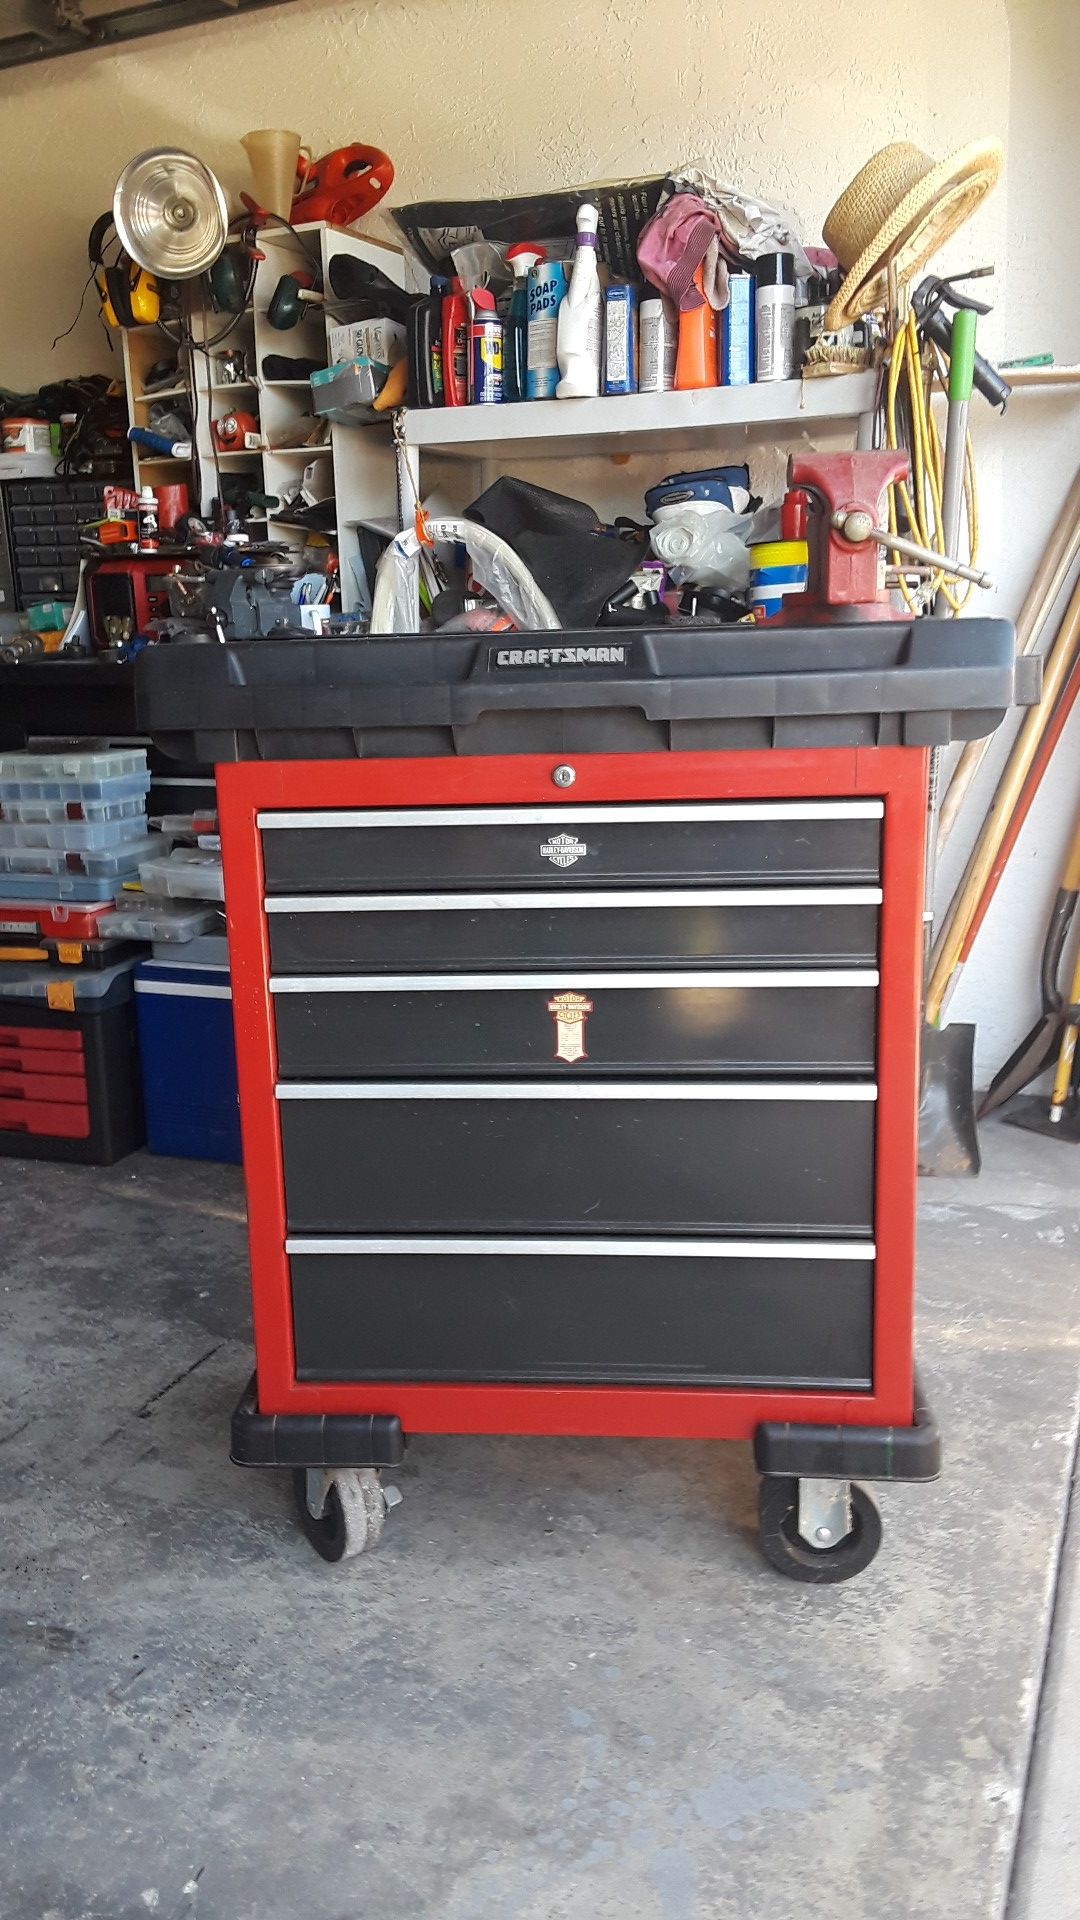 Craftsman Roll Away Tool Cart With Sliding Top Shelf For Storage 5 Drawers (SOLD VISE REDUCED PRICE FOR BOX $120)!